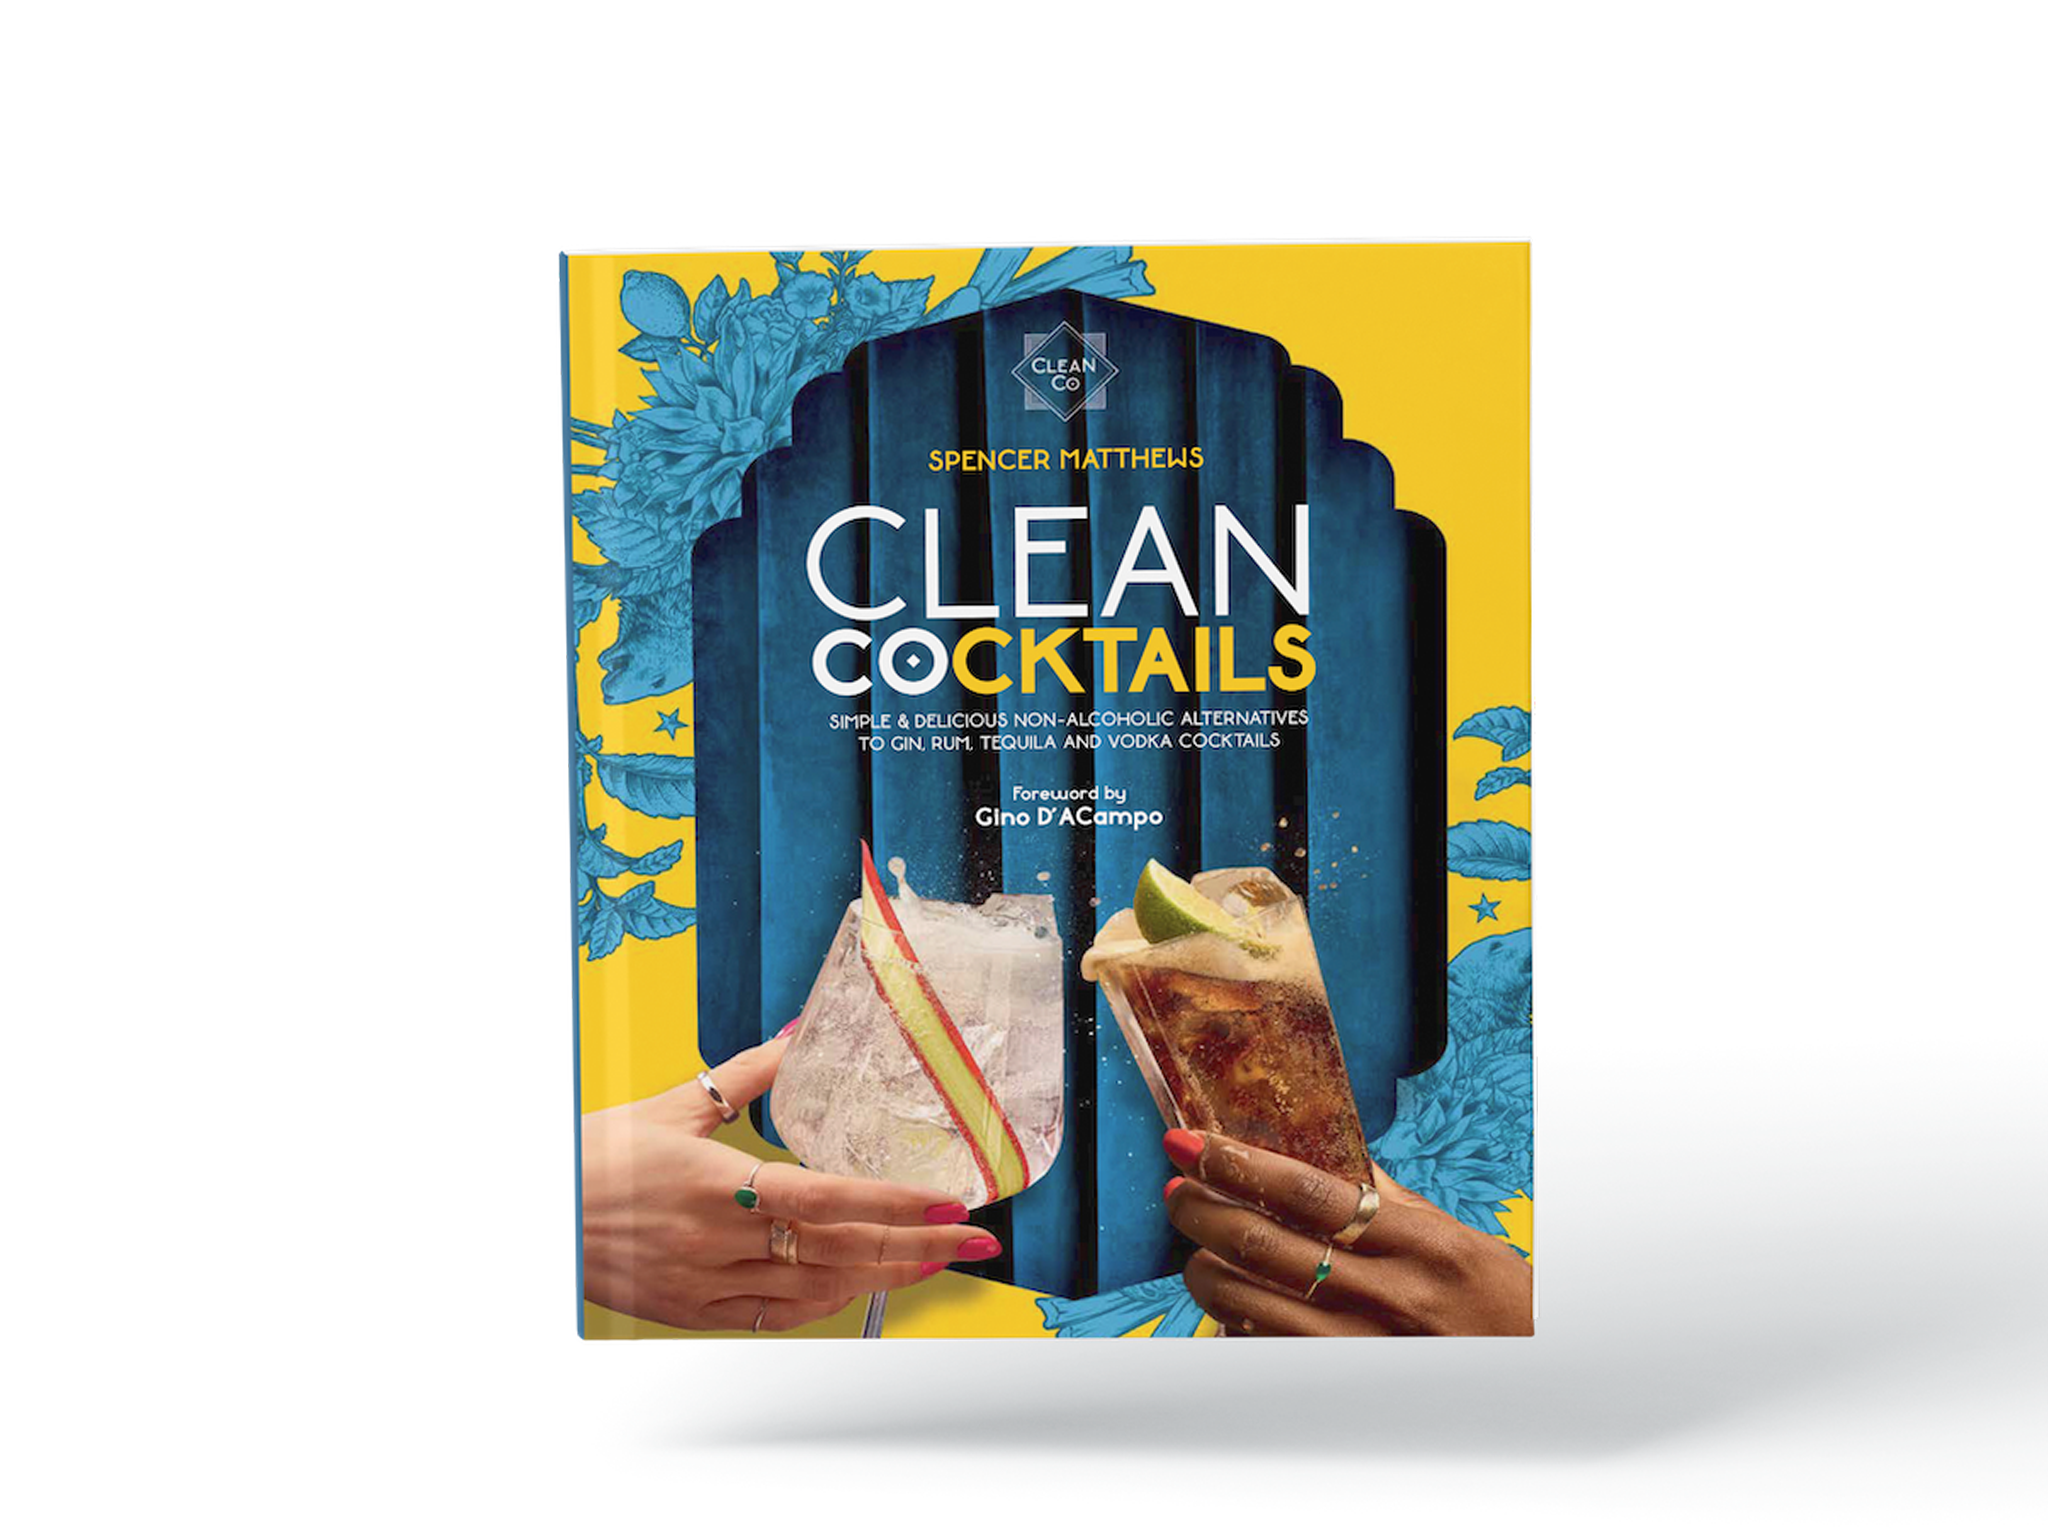 ‘CLEAN COCKTAILS’ BY SPENCER MATTHEWS, PUBLISHED BY CLEANCO